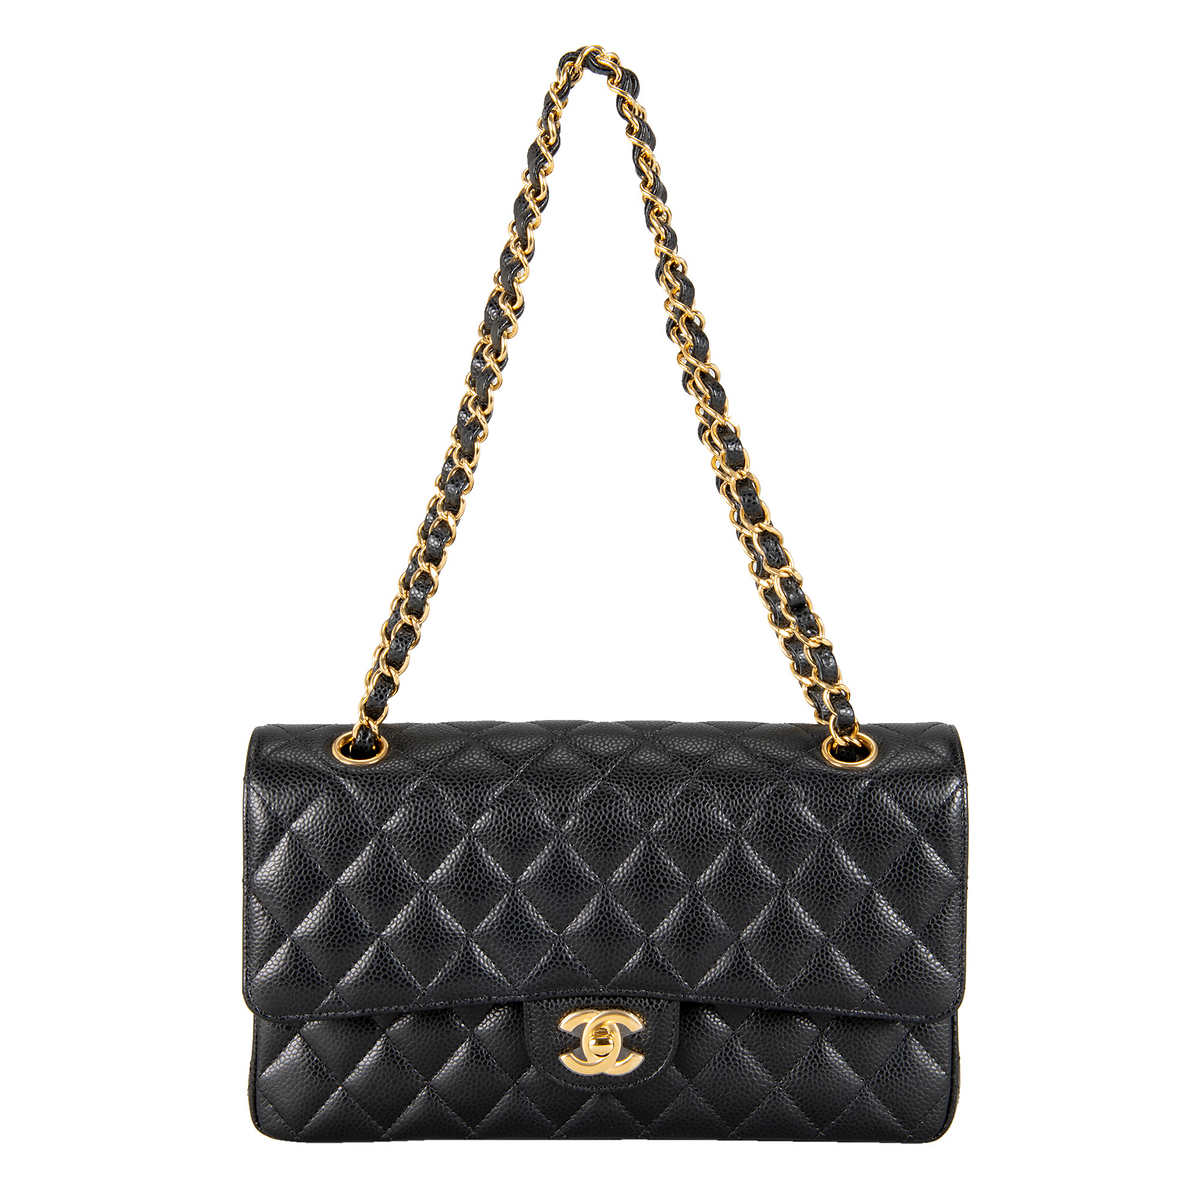 Chanel bags up its logo for new coated canvas collection - Duty Free Hunter